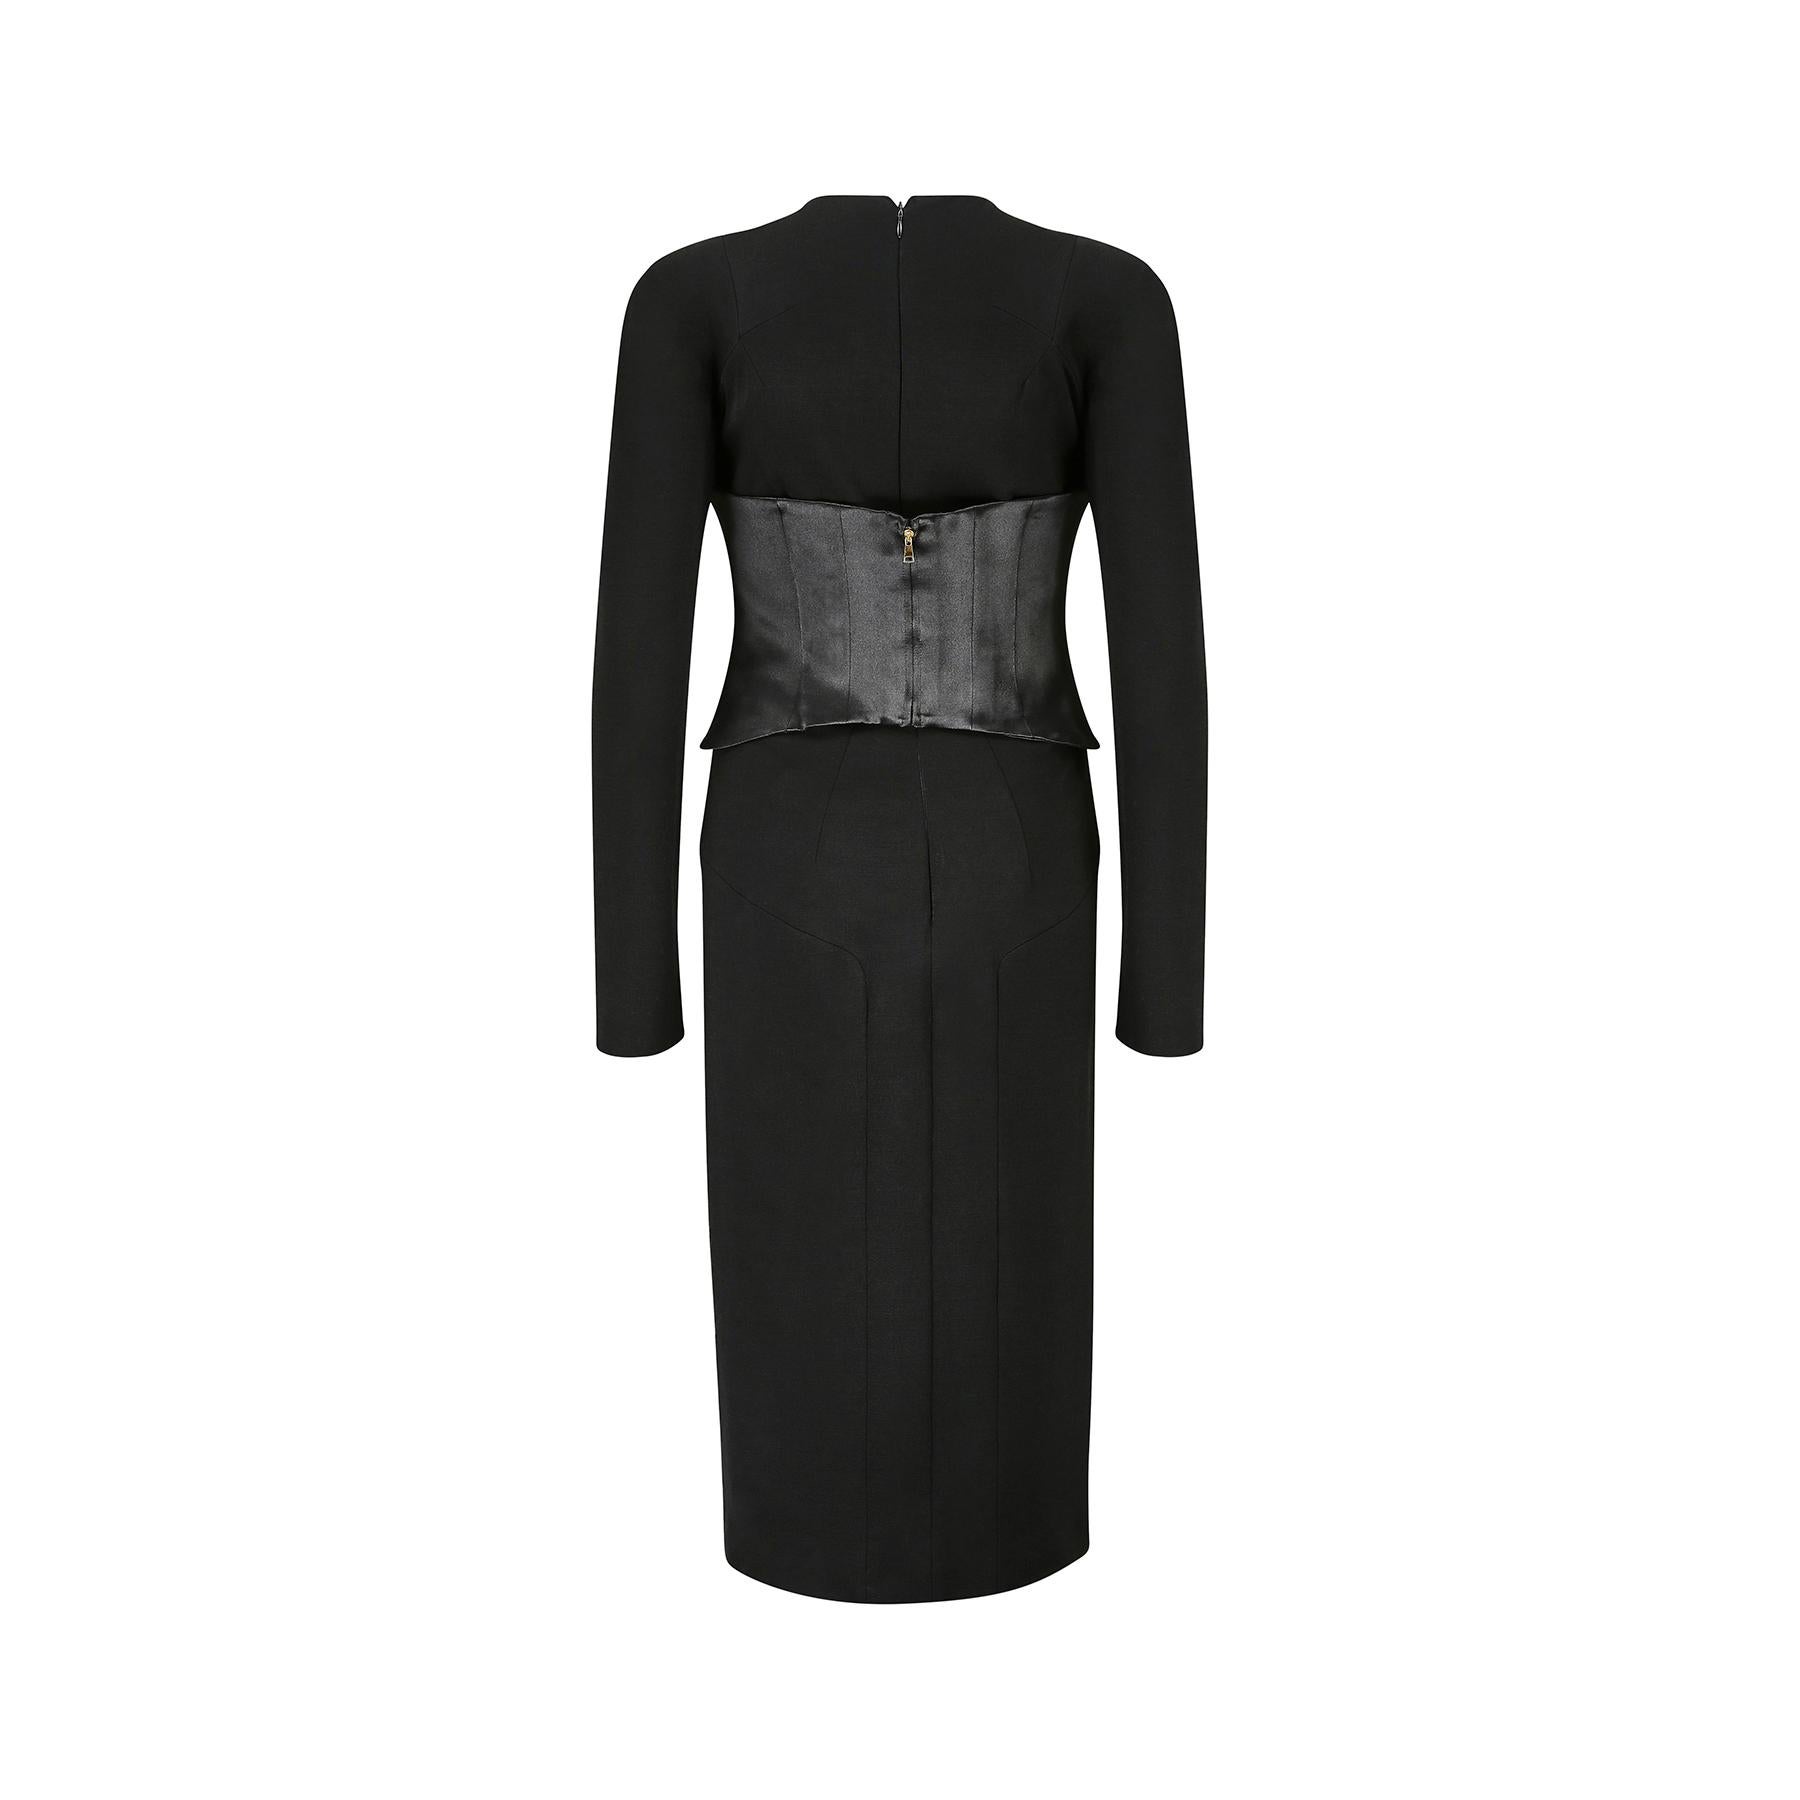 2011 Tom Ford Black Jersey Wool and Satin Corset Dress In New Condition For Sale In London, GB